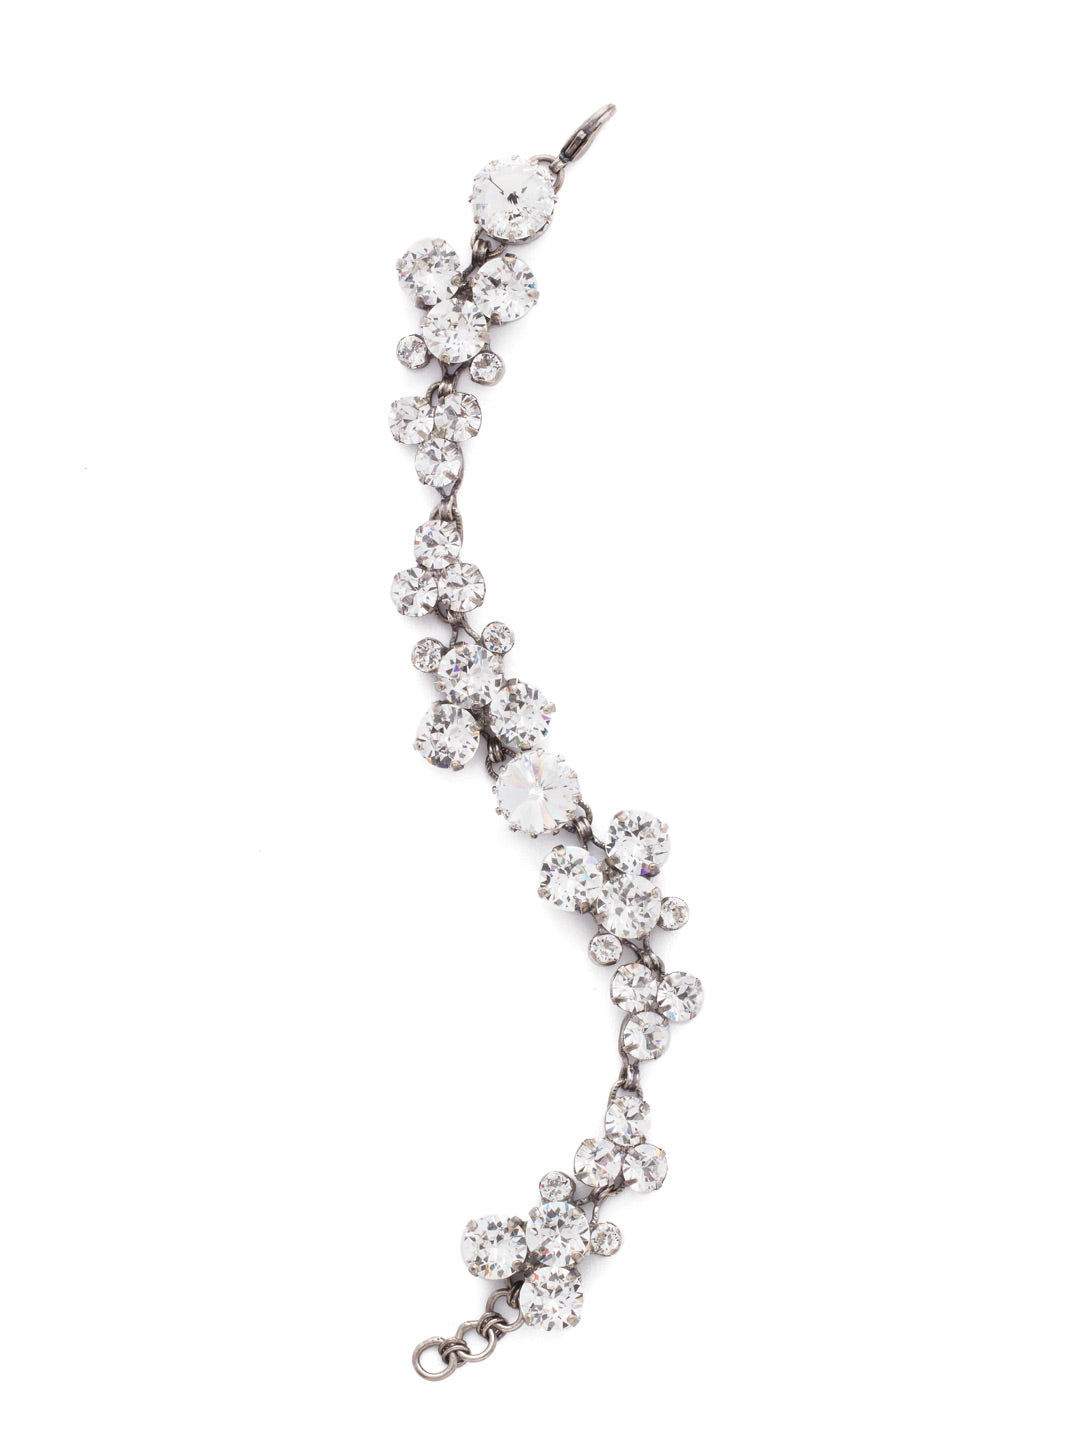 Product Image: Well-Rounded Tennis Bracelet